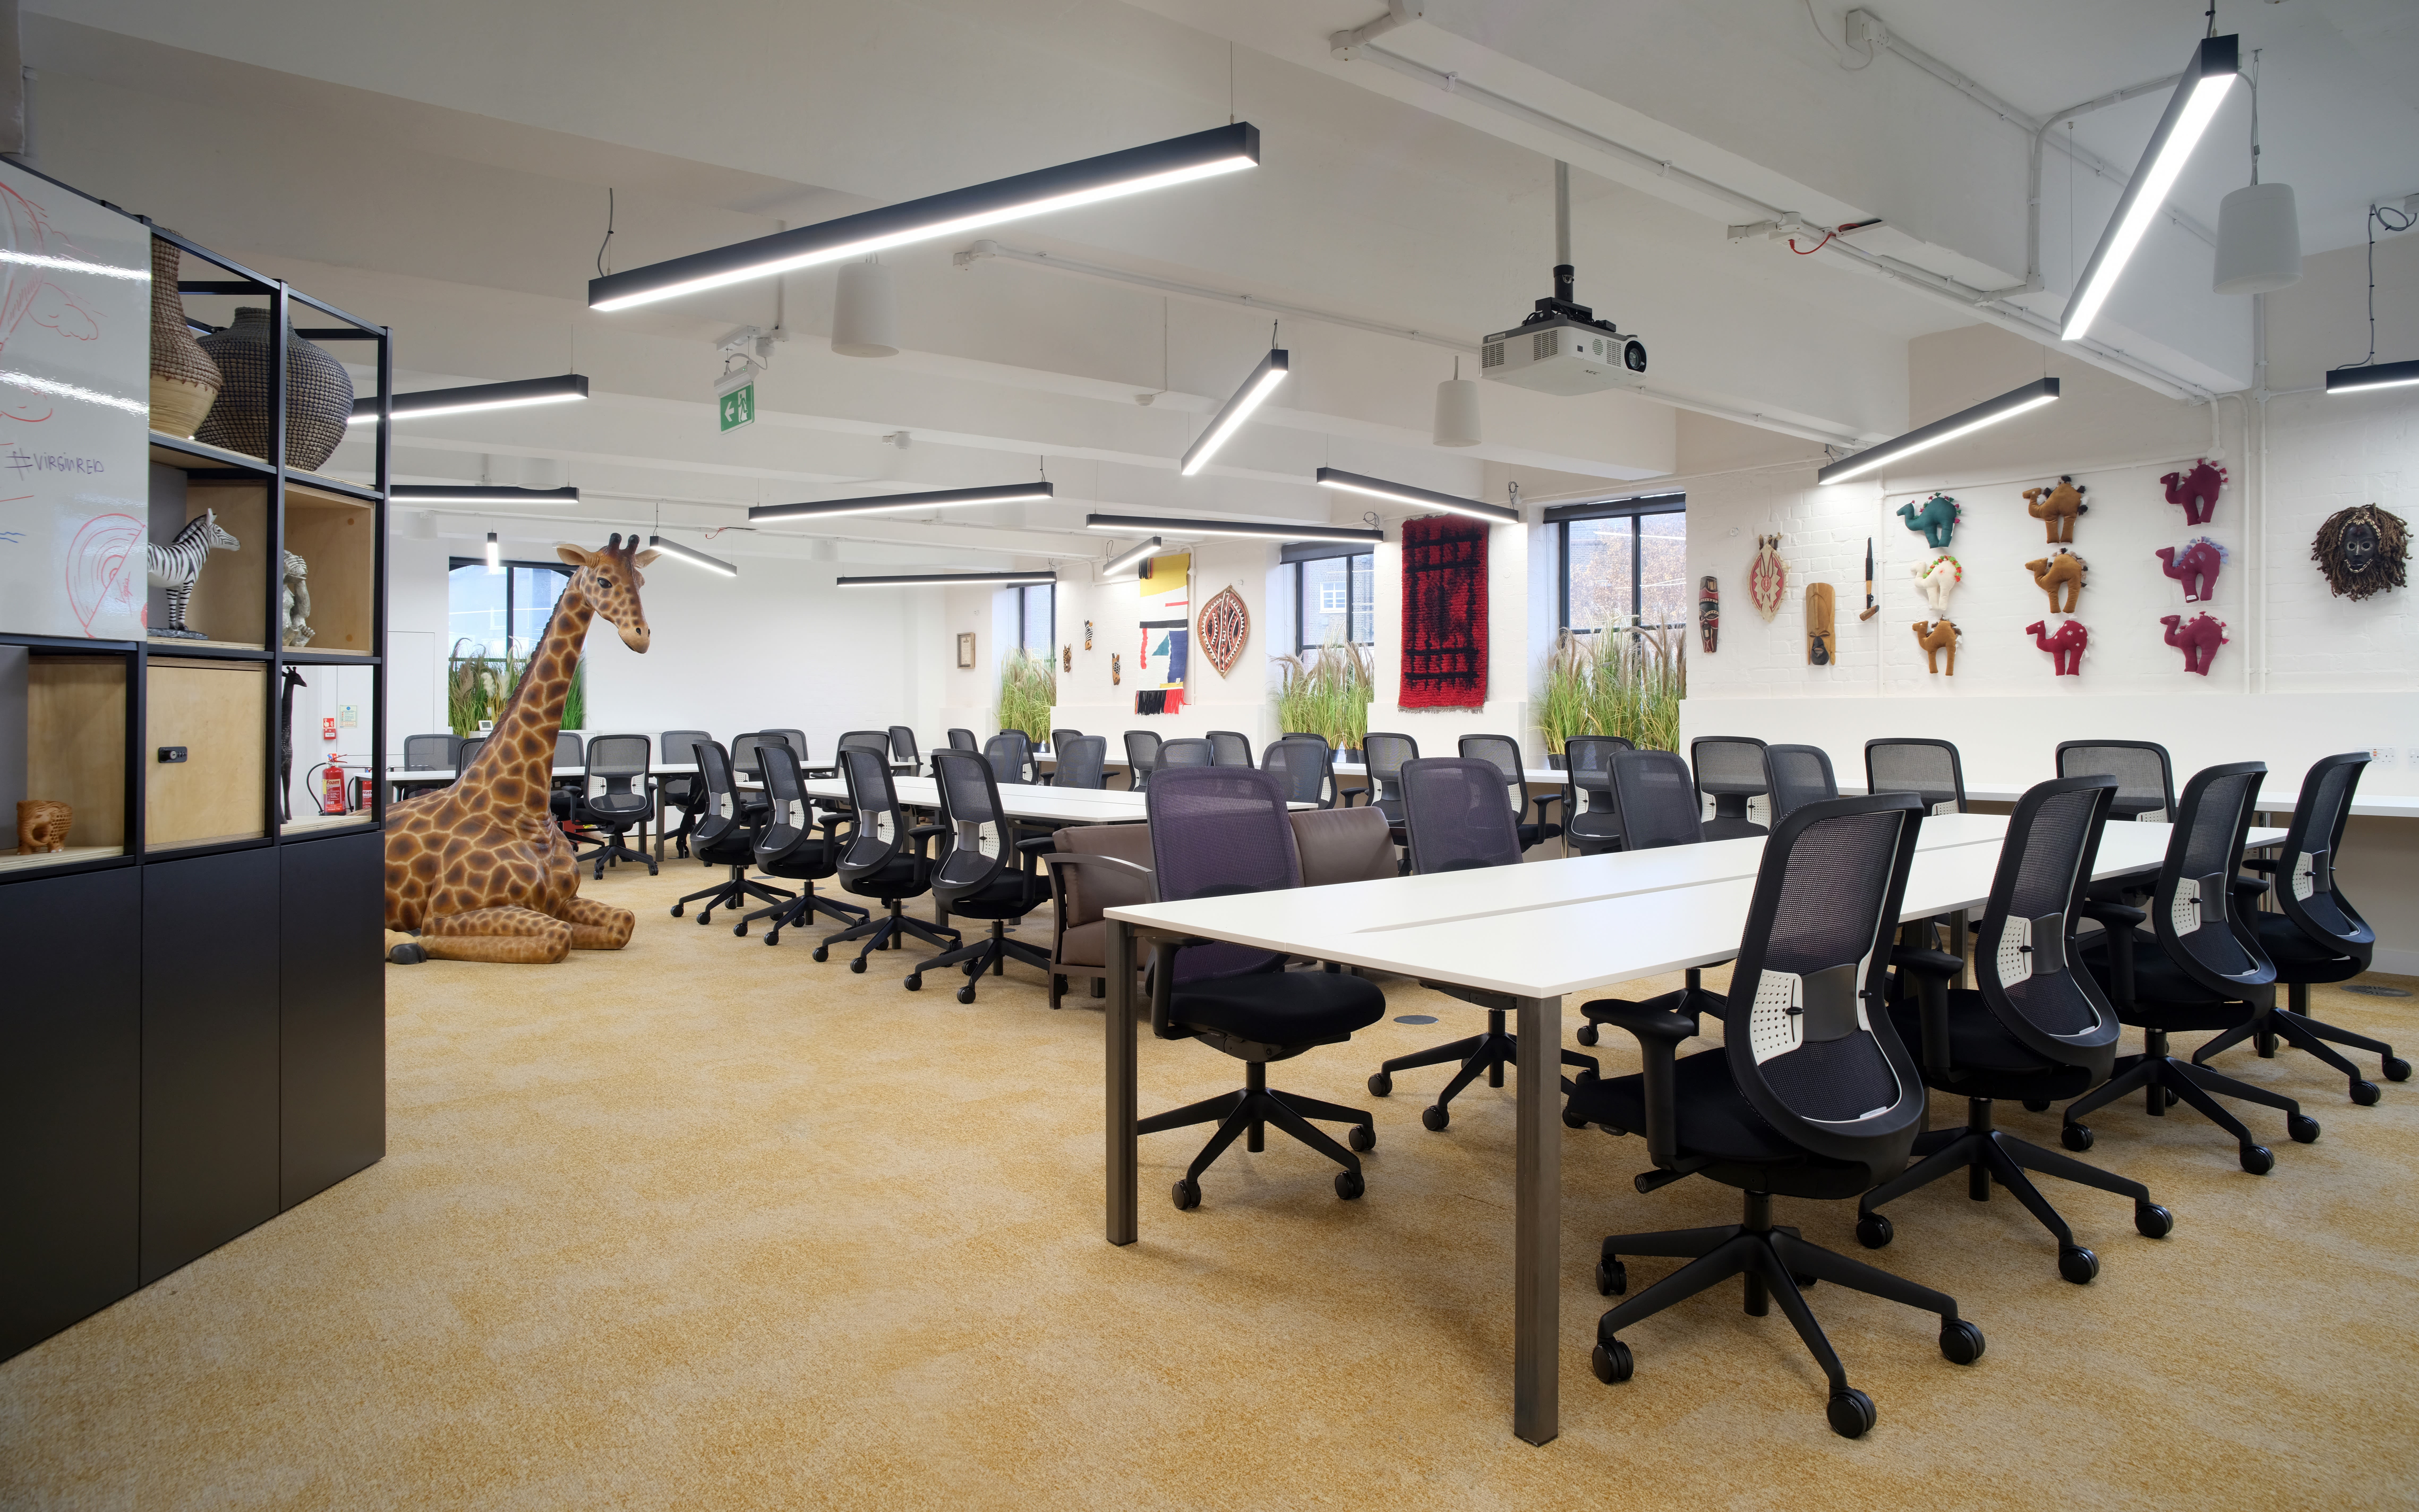 The inside of an office at Virgin Red showing desks and chairs and a large model of a giraffe